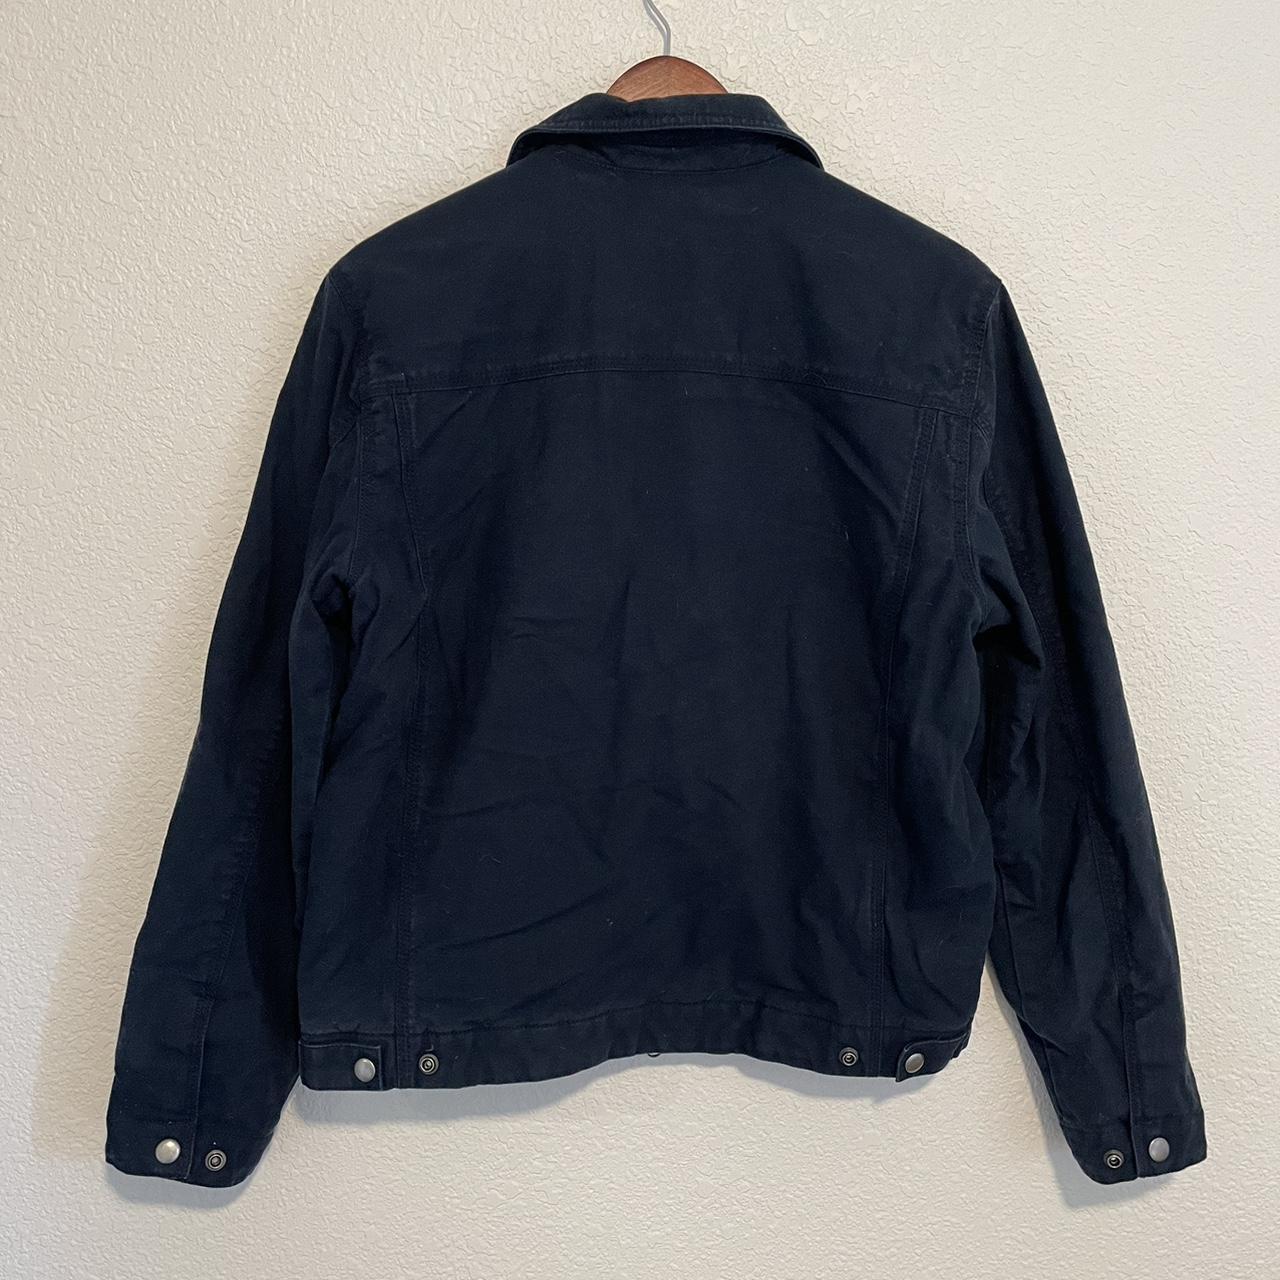 Navy Everlane jacket, great for fall/winter. Message... - Depop